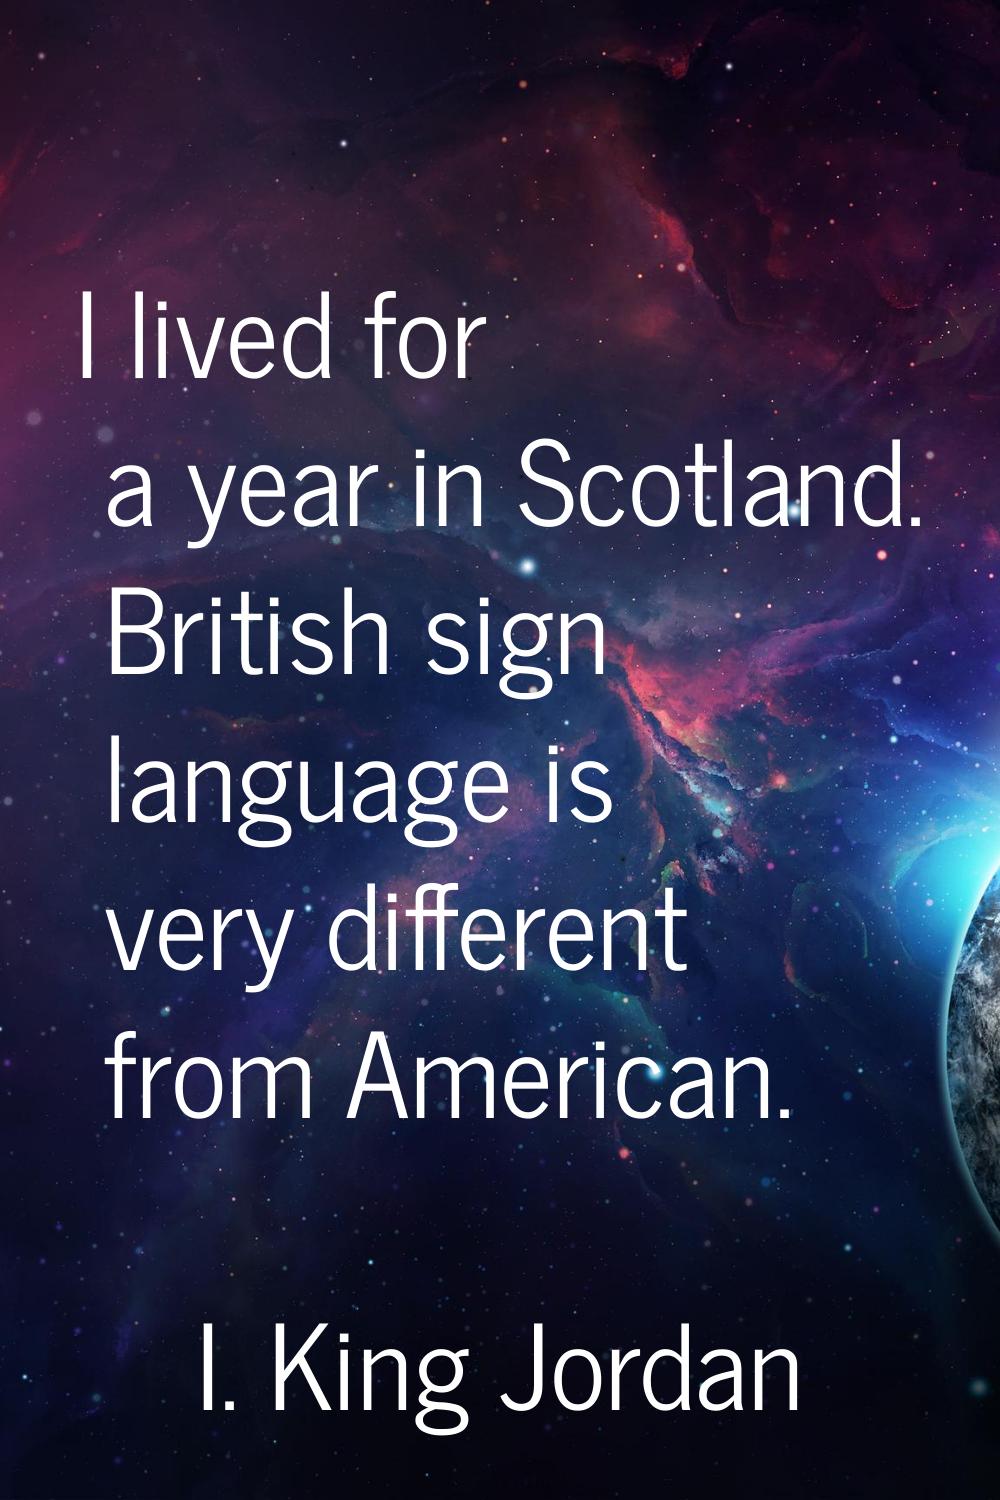 I lived for a year in Scotland. British sign language is very different from American.